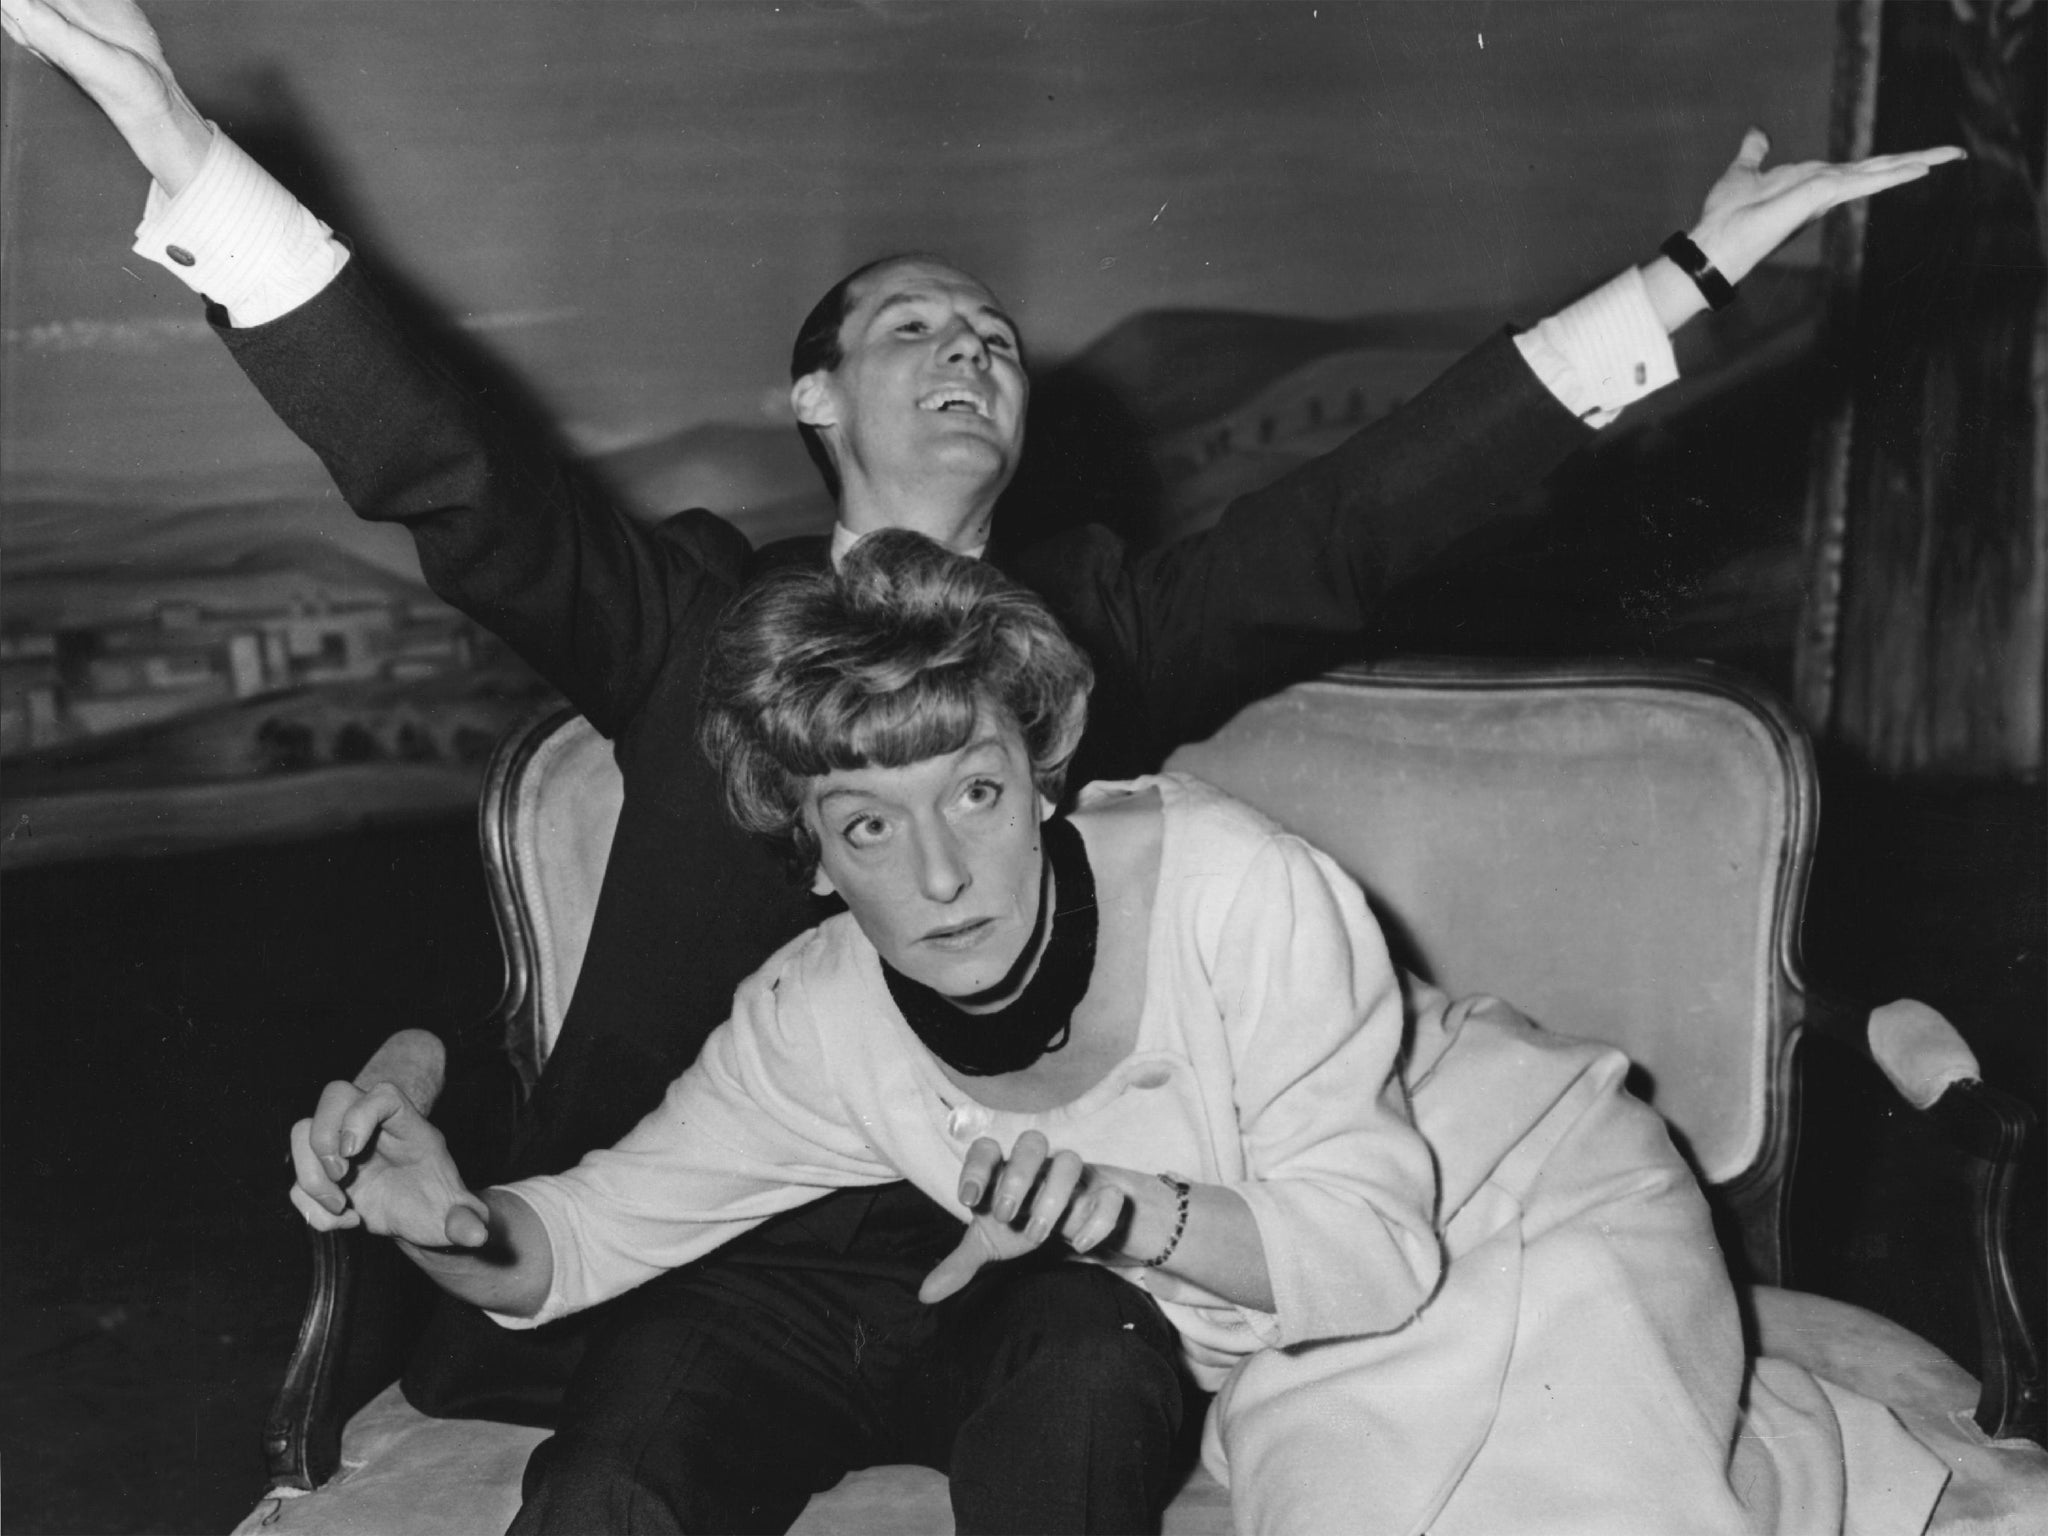 Mackay with his wife Dorothy Reynolds in rehearsals for ‘Wildest Dreams’ in 1960